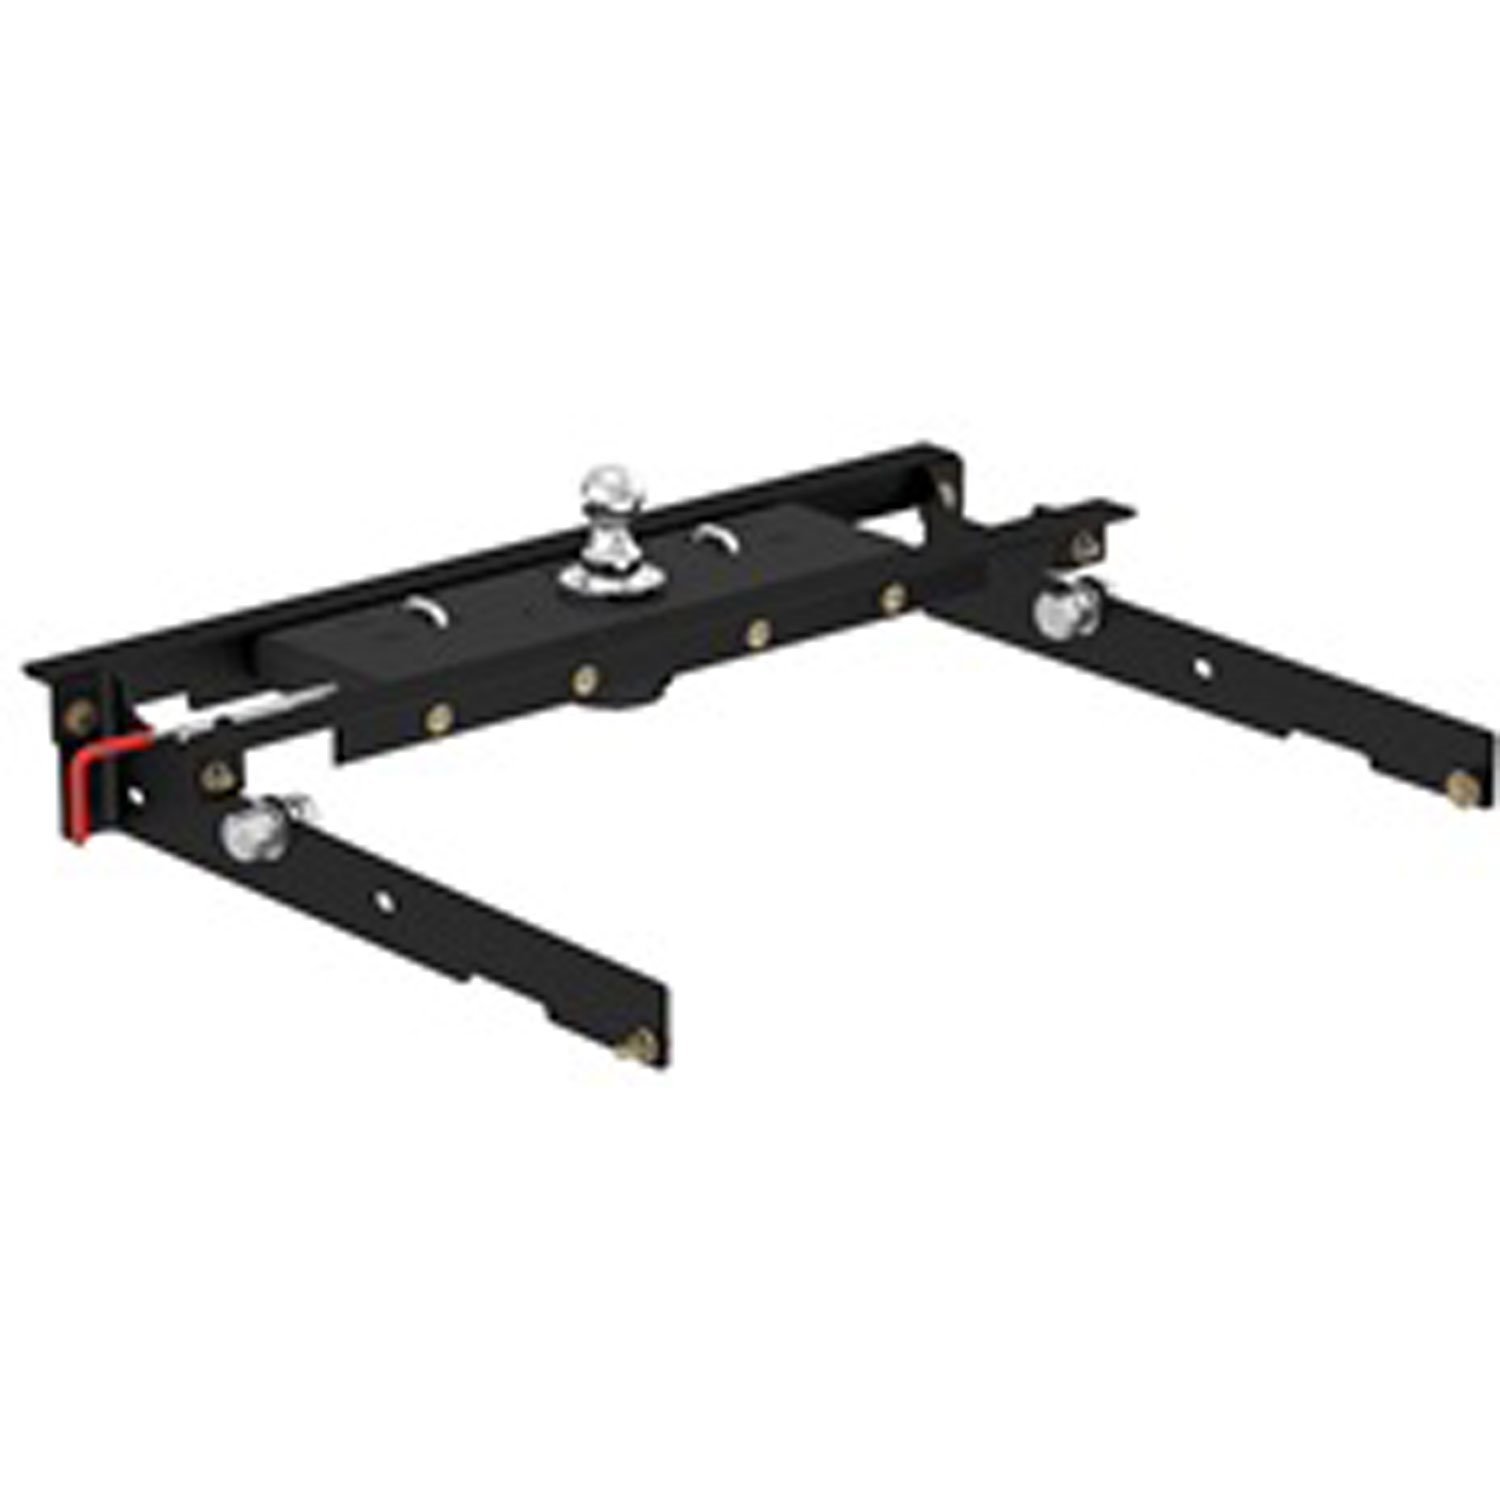 Double-Lock Gooseneck Hitch/Install Kit for 1980-1998 Ford Truck